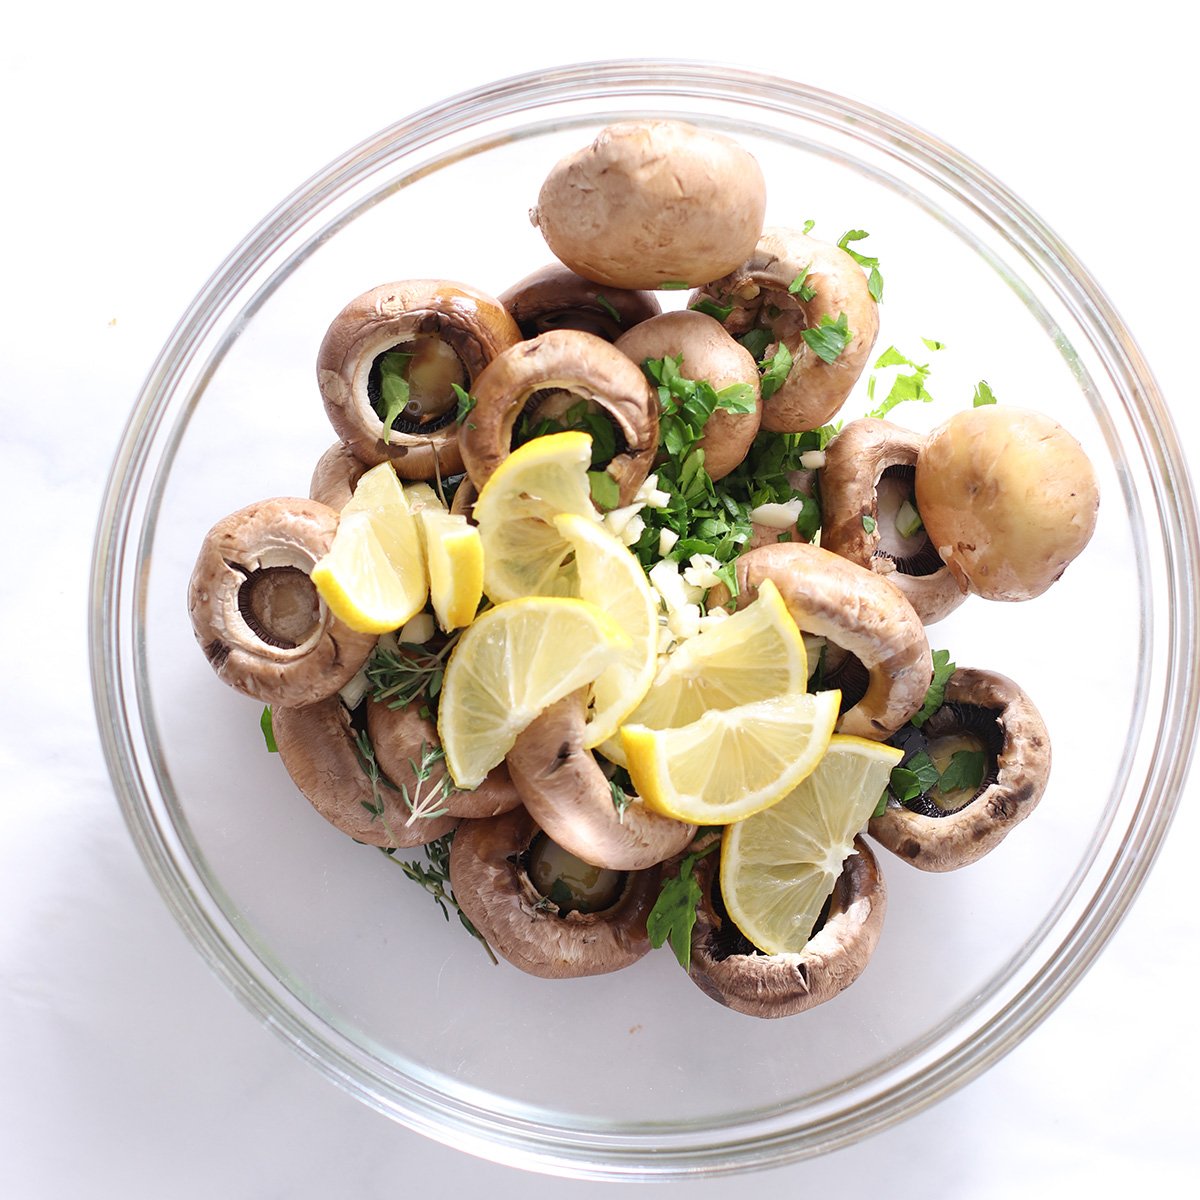 mushrooms in a bowl with other ingredients to be roasted.